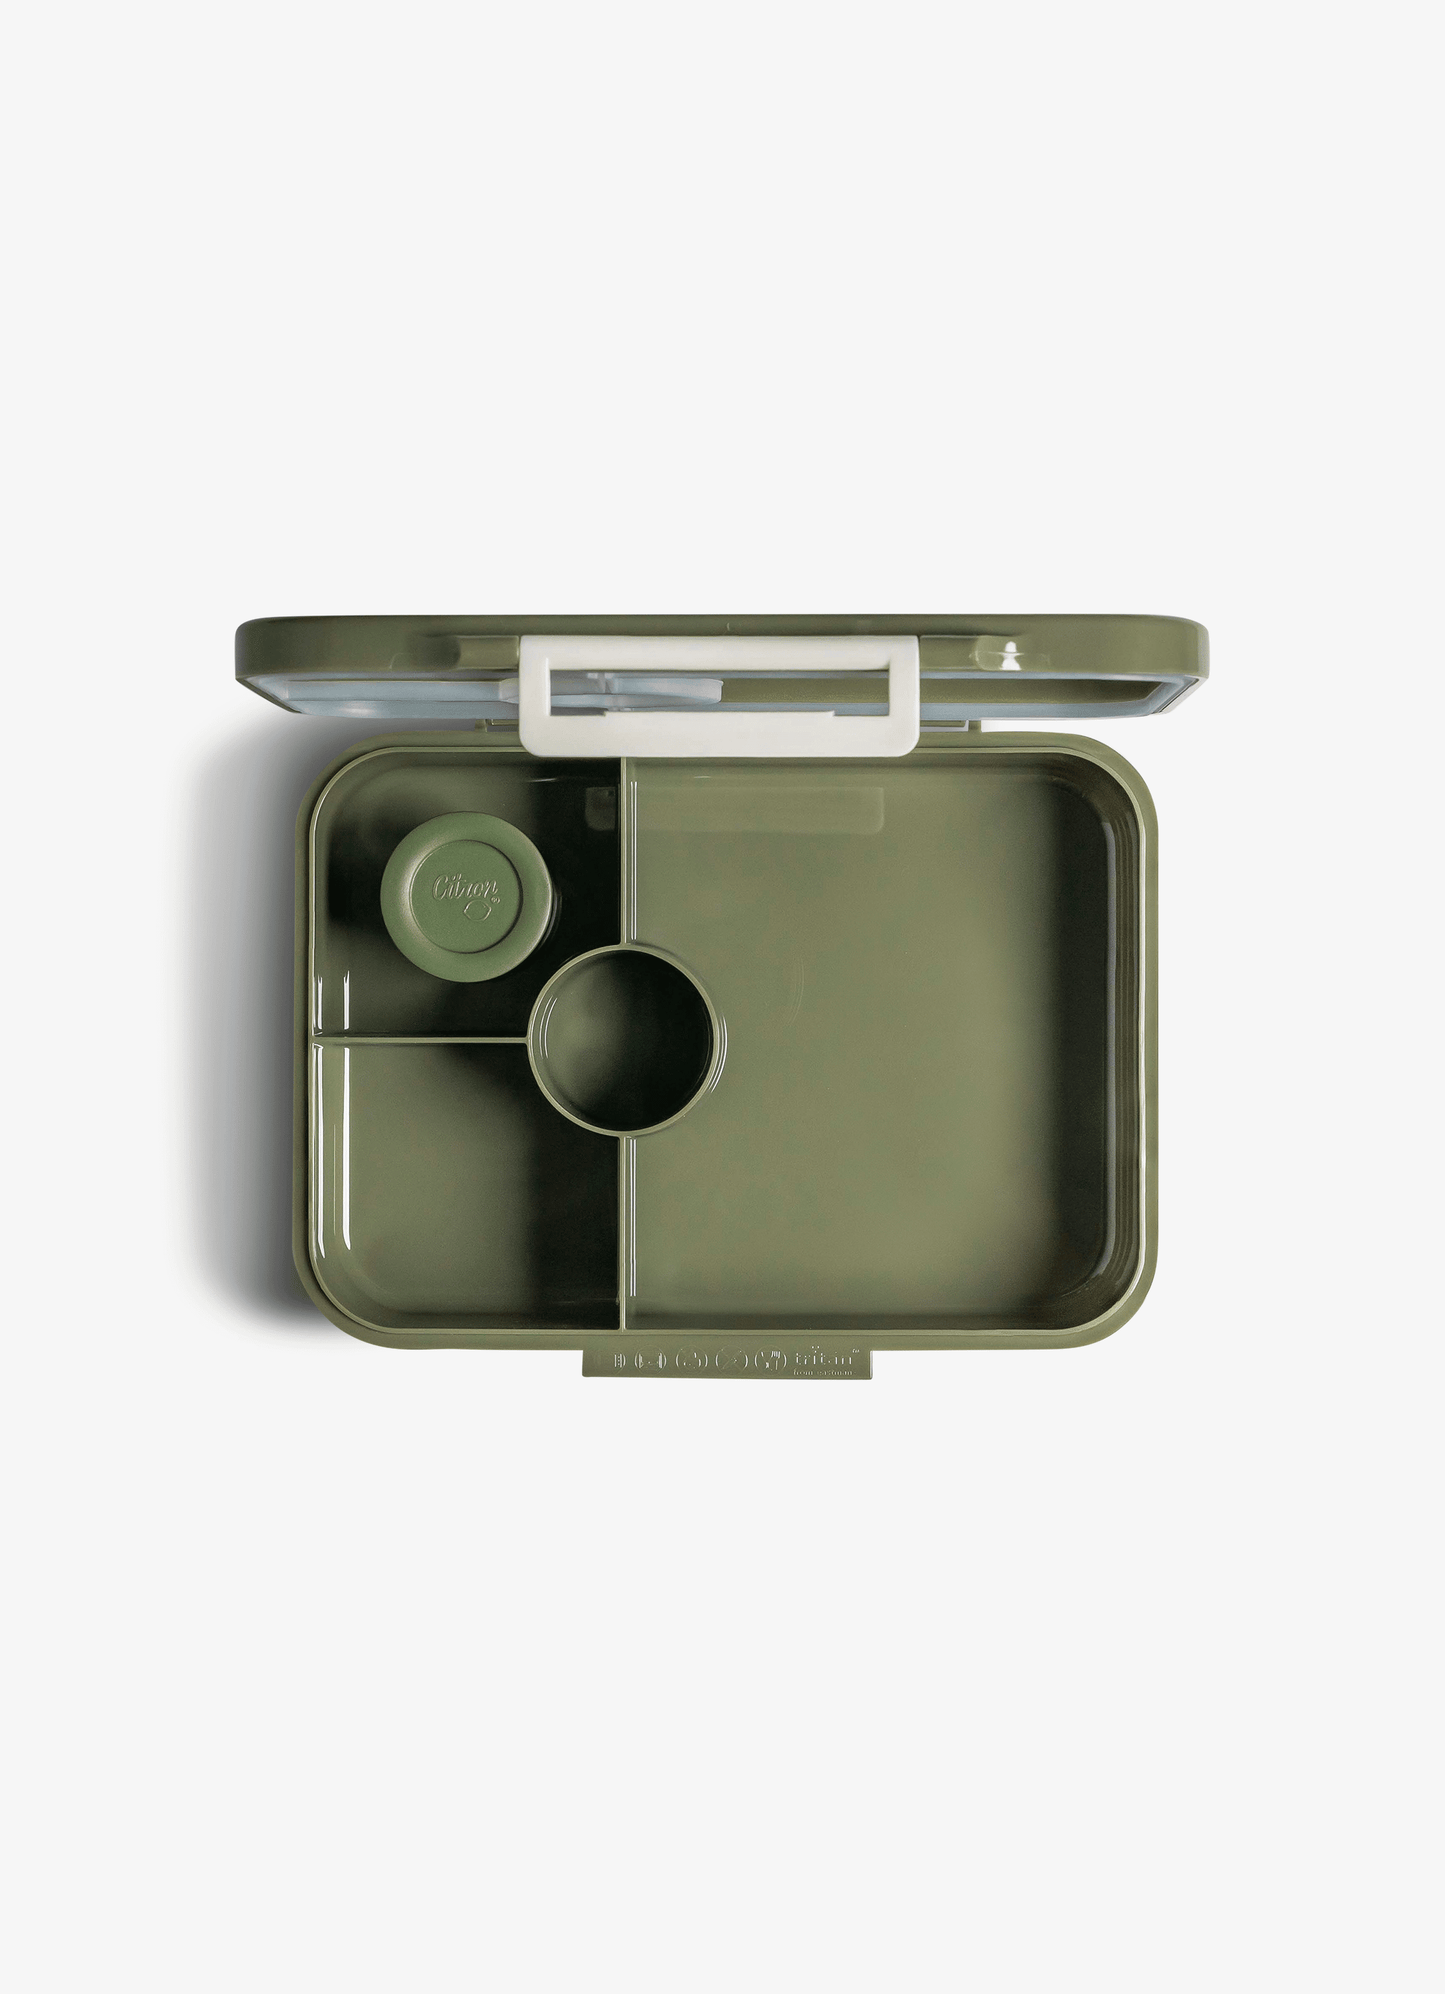 Incredible Tritan Lunch Box - 4 Compartments - Green